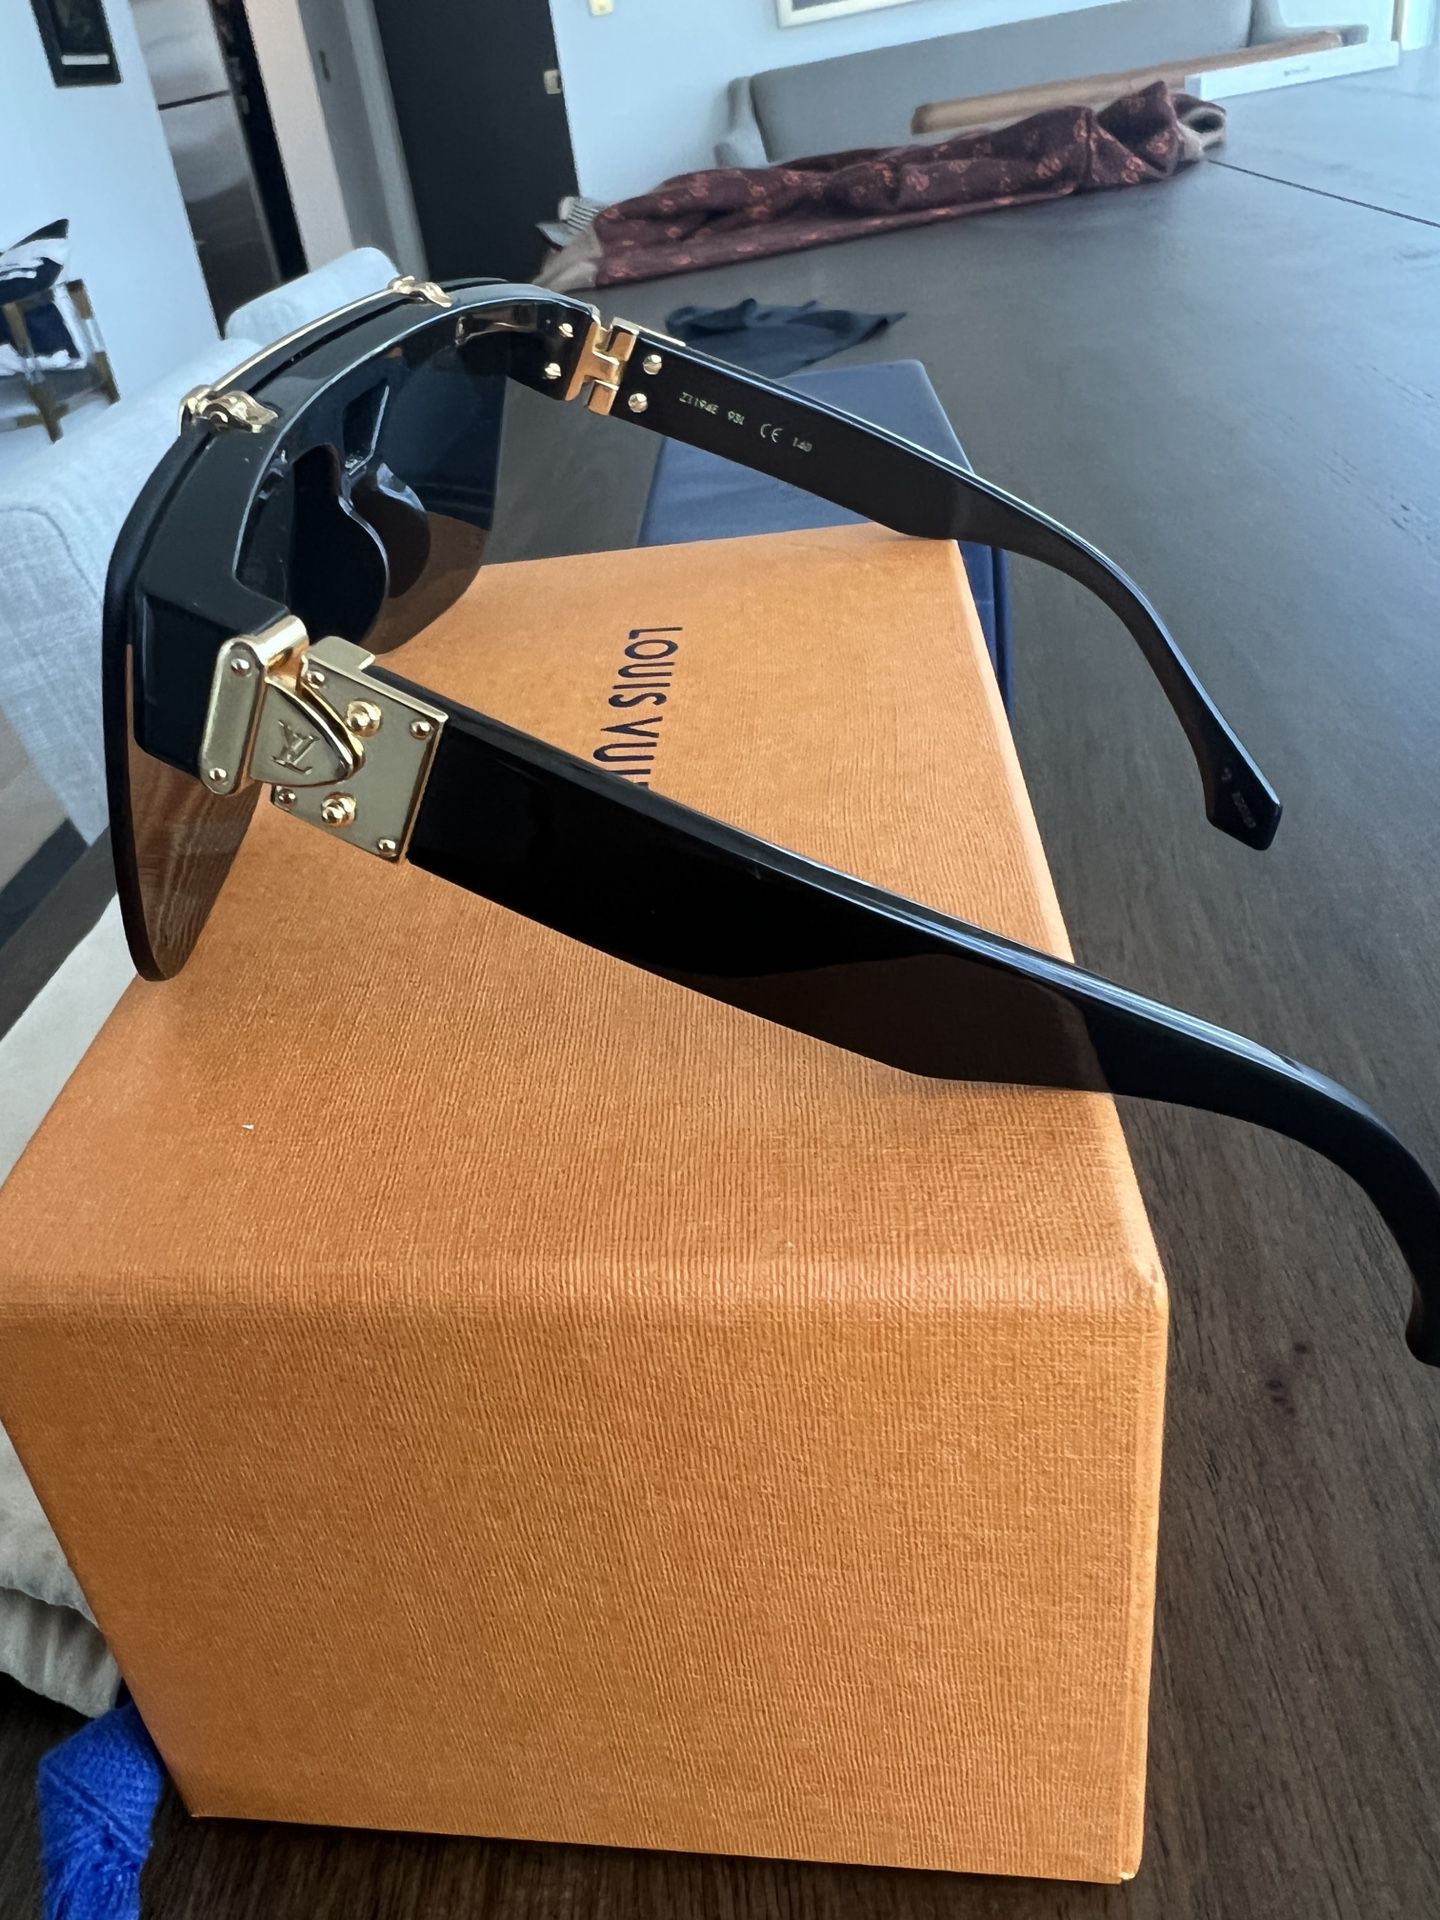 Authentic Louis Vuitton Sunglasses (barely Used) for Sale in Long